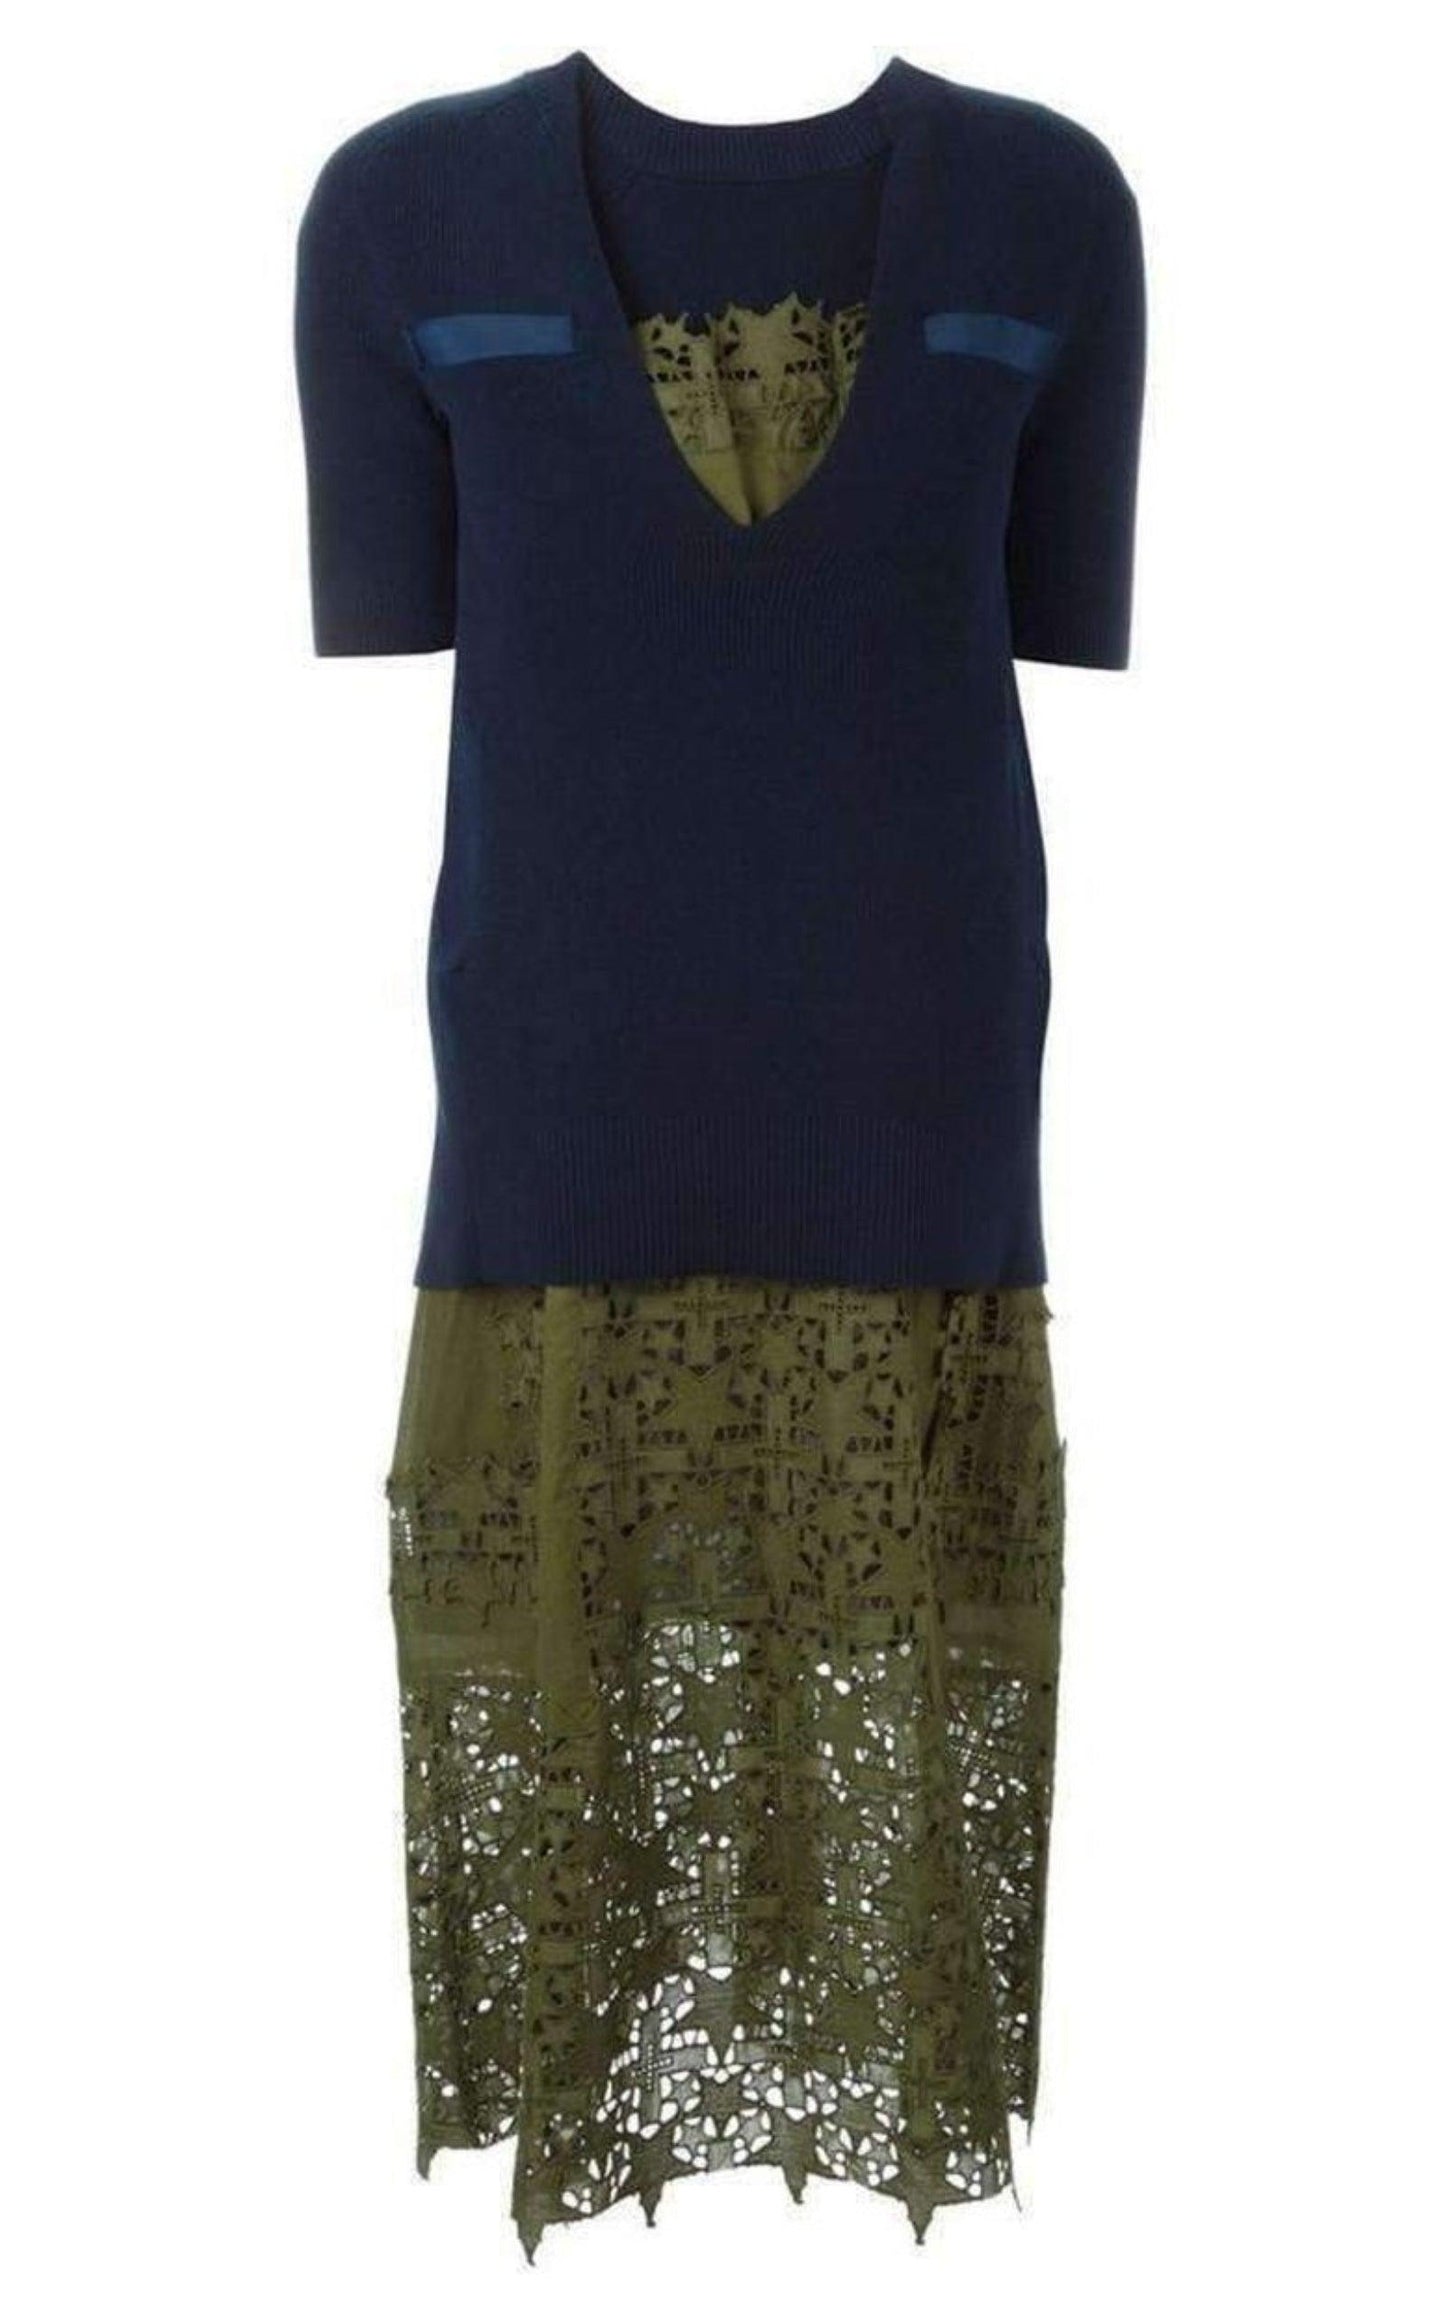  SacaiSweater Top Green Embroidered Dress - Runway Catalog